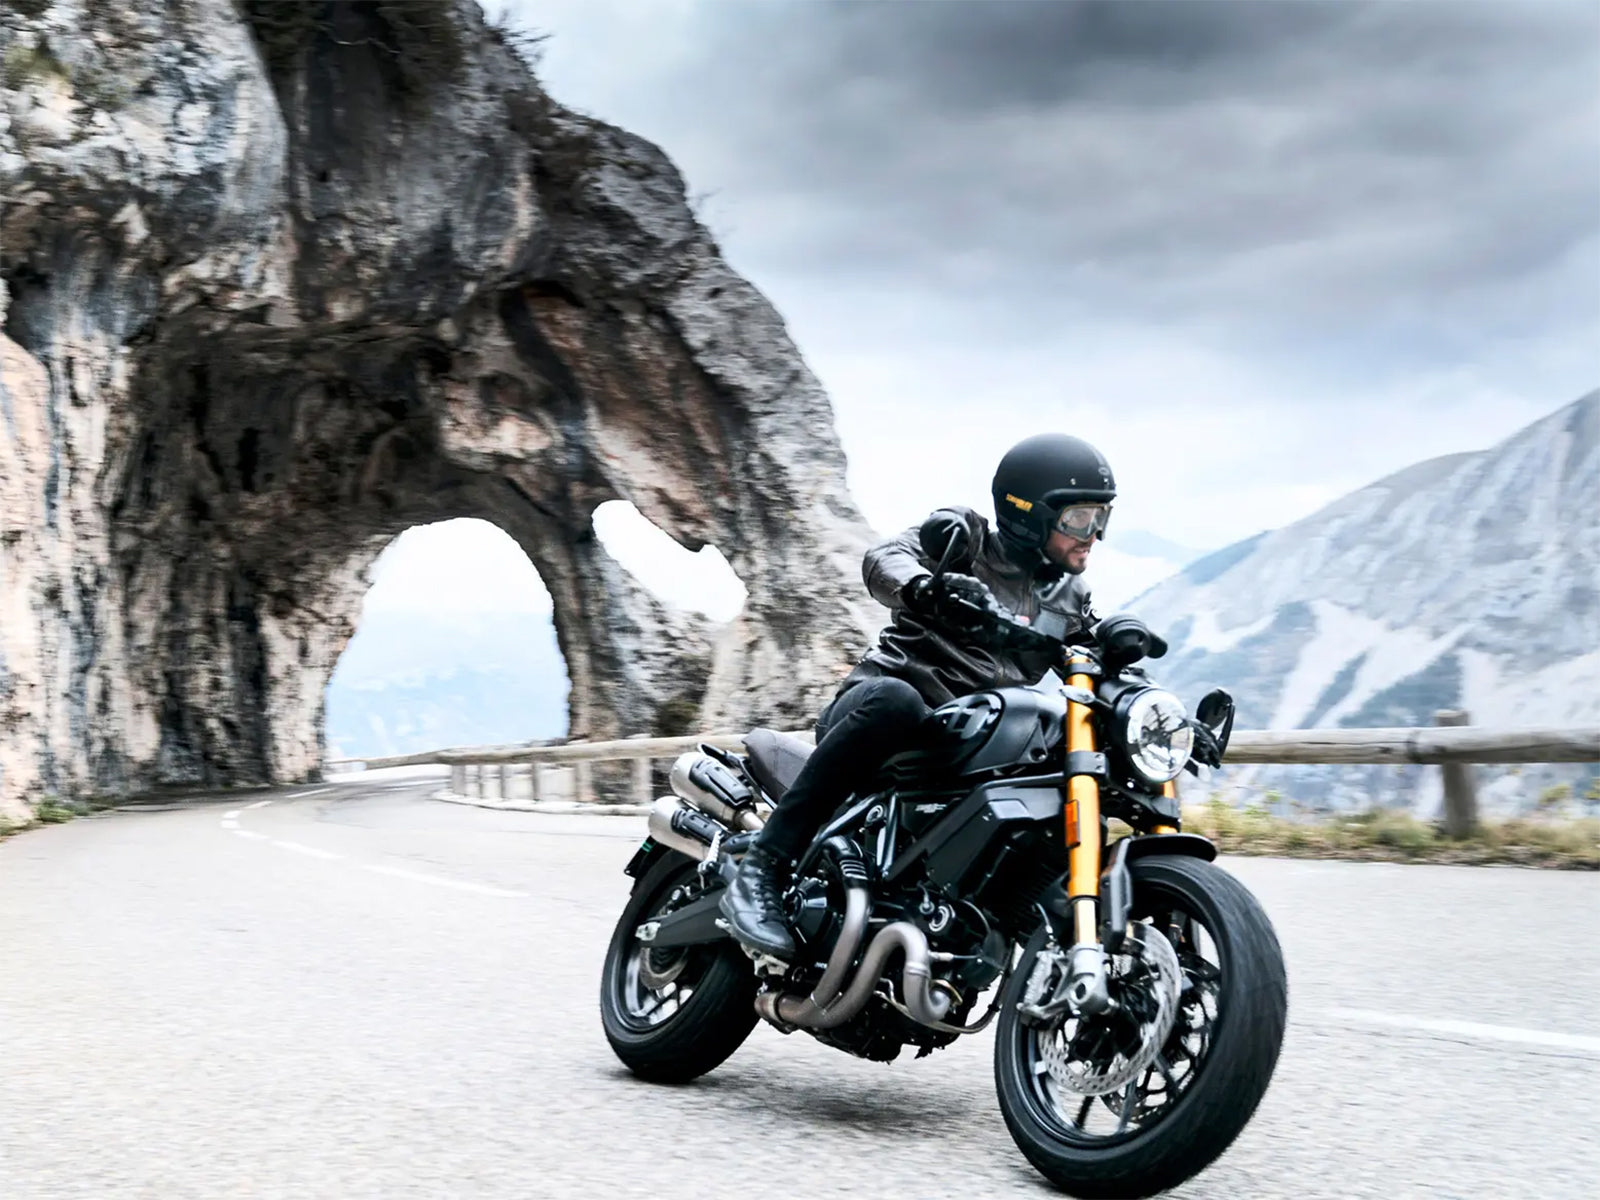 Ducati Motorcycle Reveal the new 2020 Scrambler 1100 Pro and Sport Pro